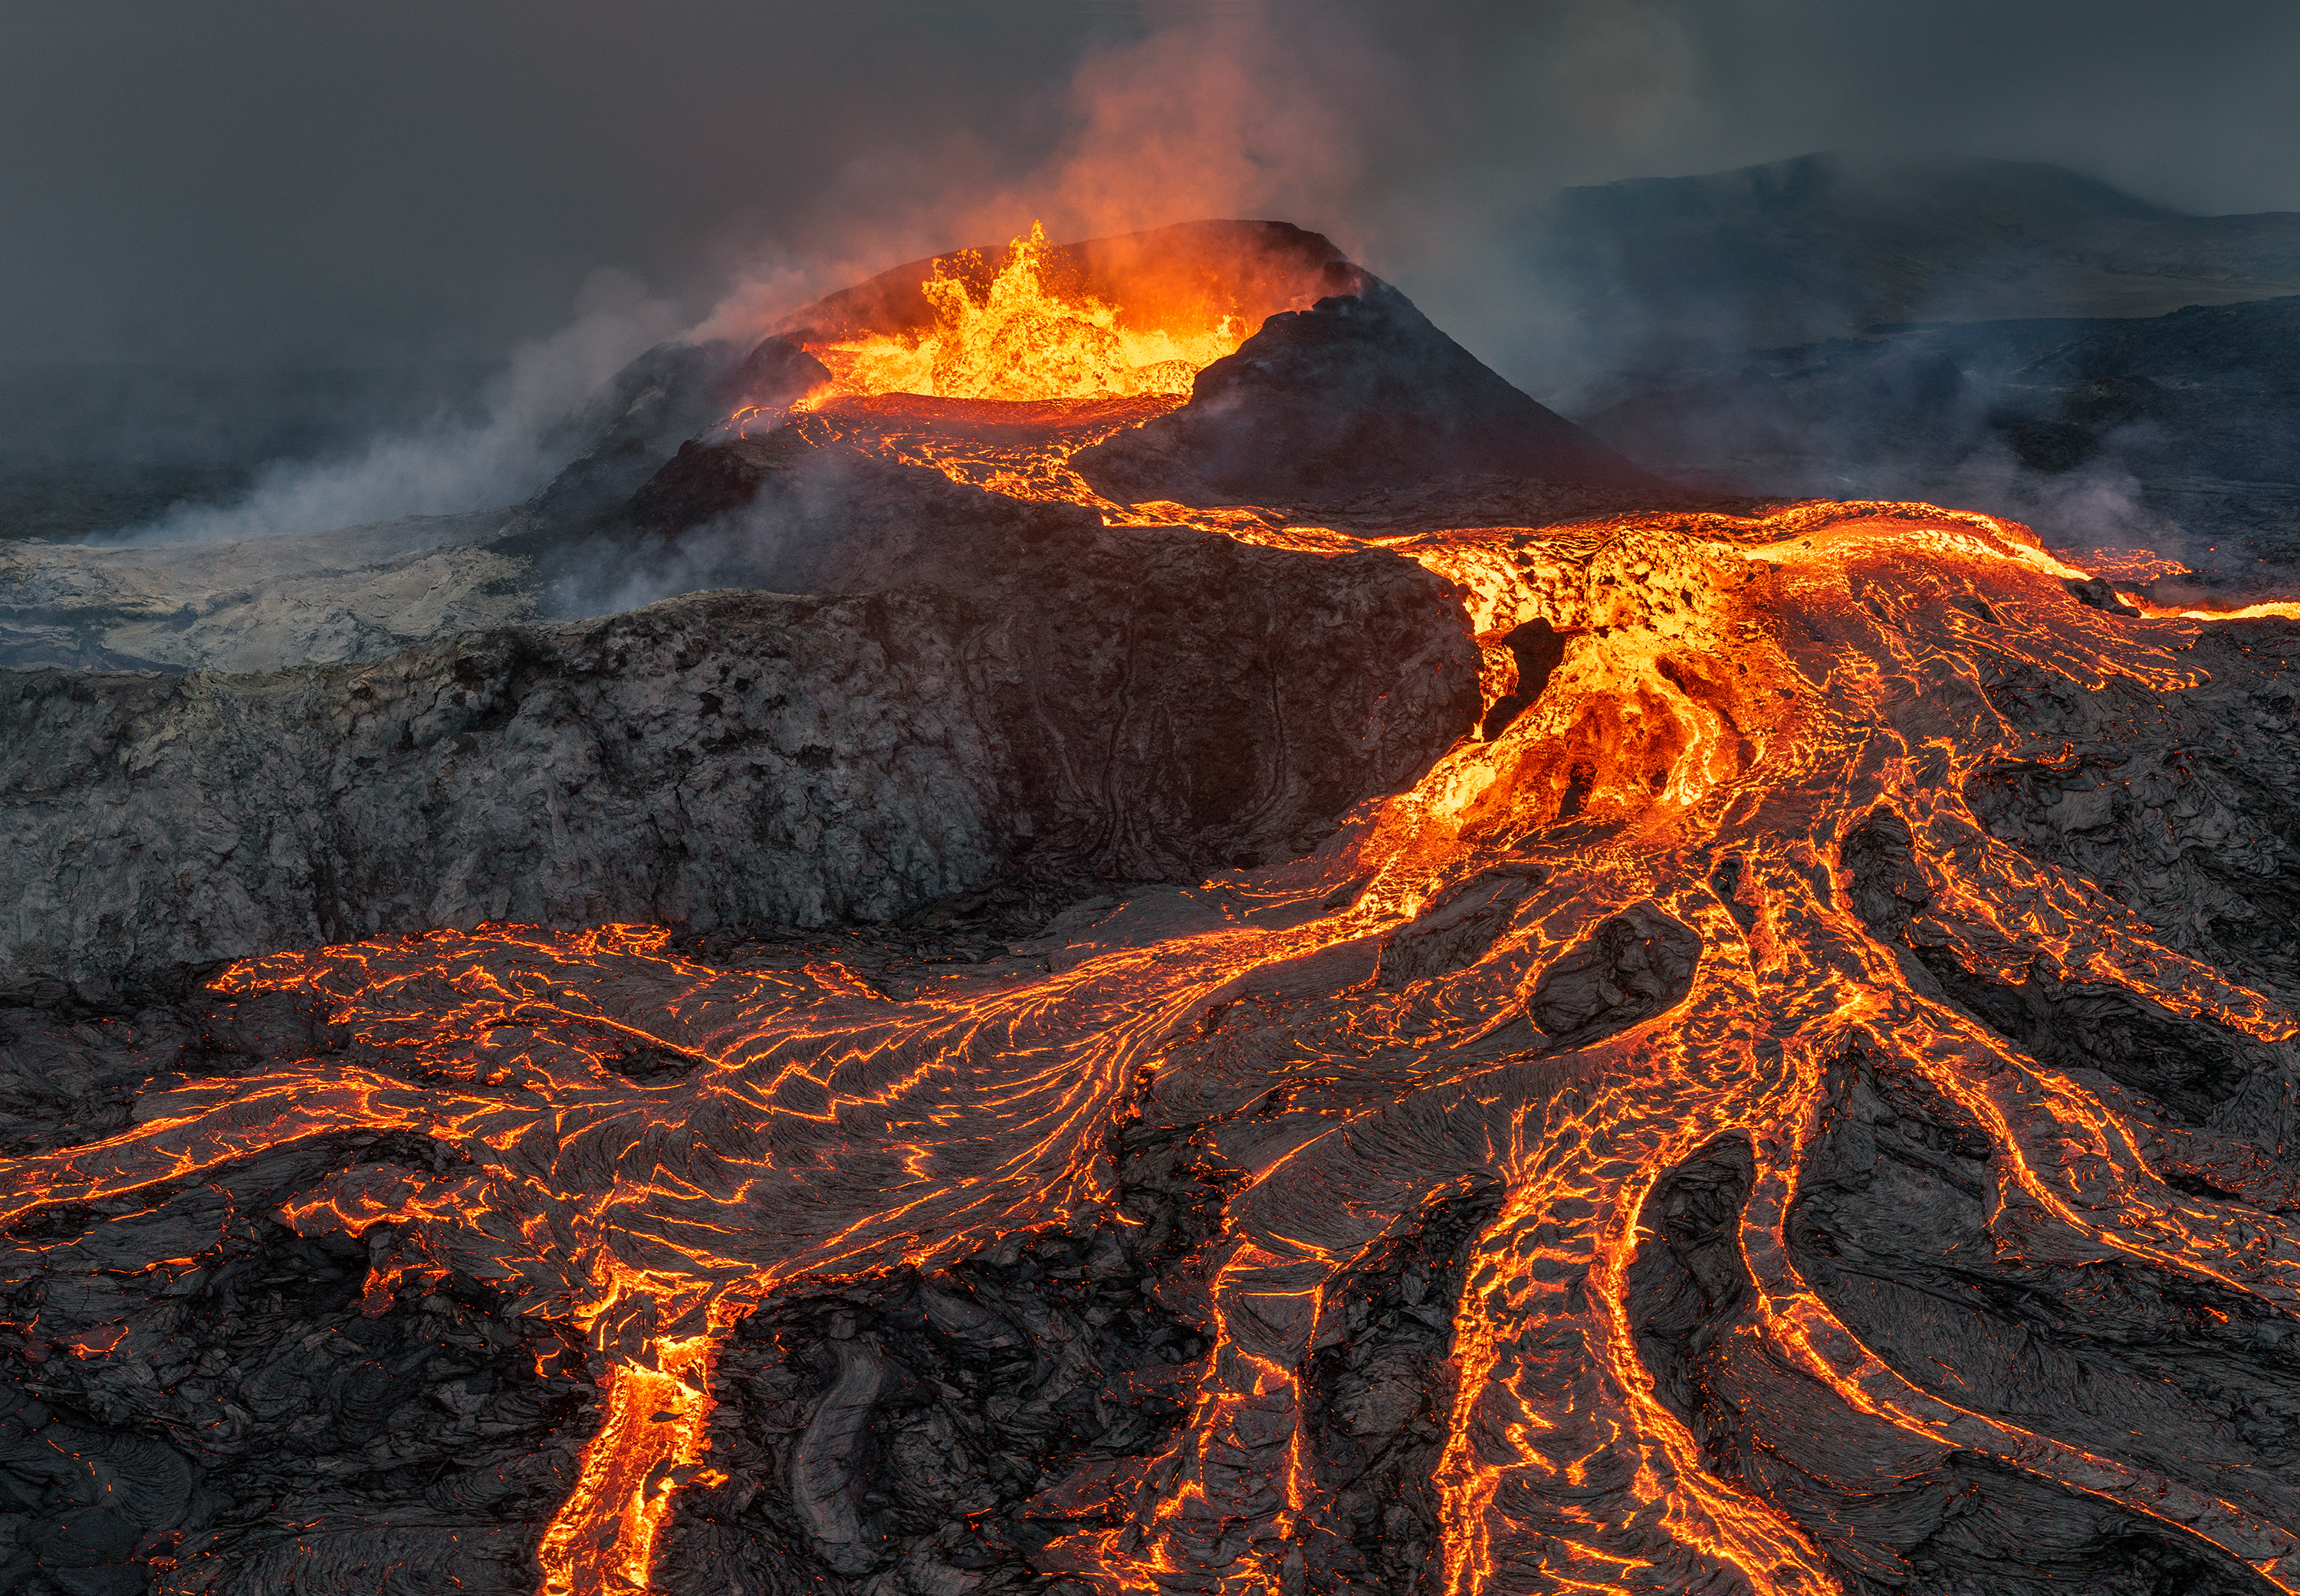 Magma rises directly from the mantle, driven by gigantic gas bubbles 10-15 metres in diameter, which burst at the surface. As a squall blanketed the Reykjanes peninsula with clouds and heavy rain, I ascended to the base of Geldingadalir, Iceland's youngest volcano.